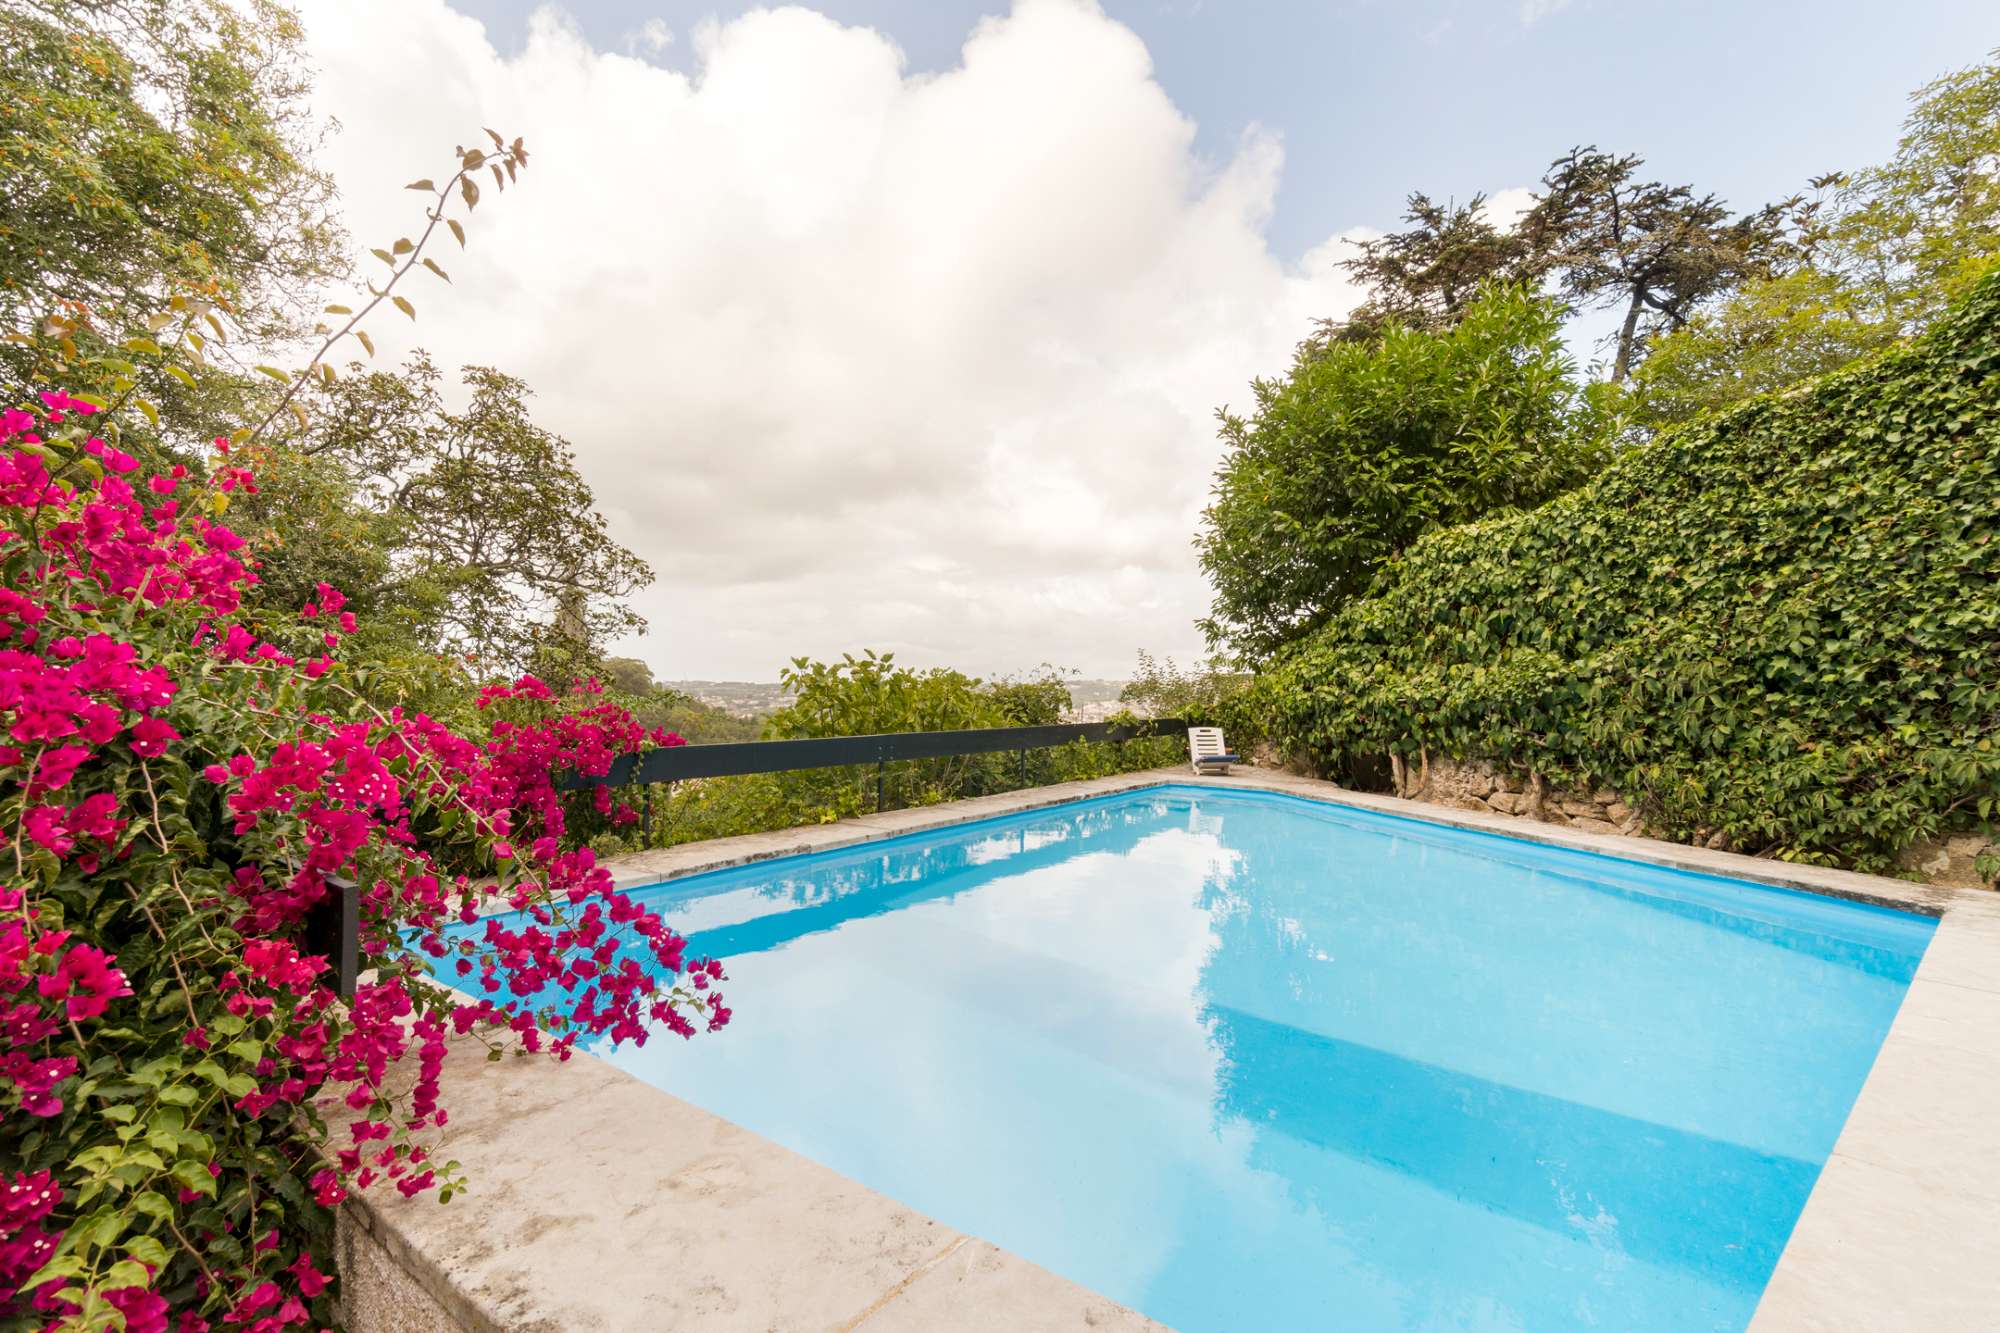 Detached 5-bedroom house with sea view, swimming pool and garden in Sintra